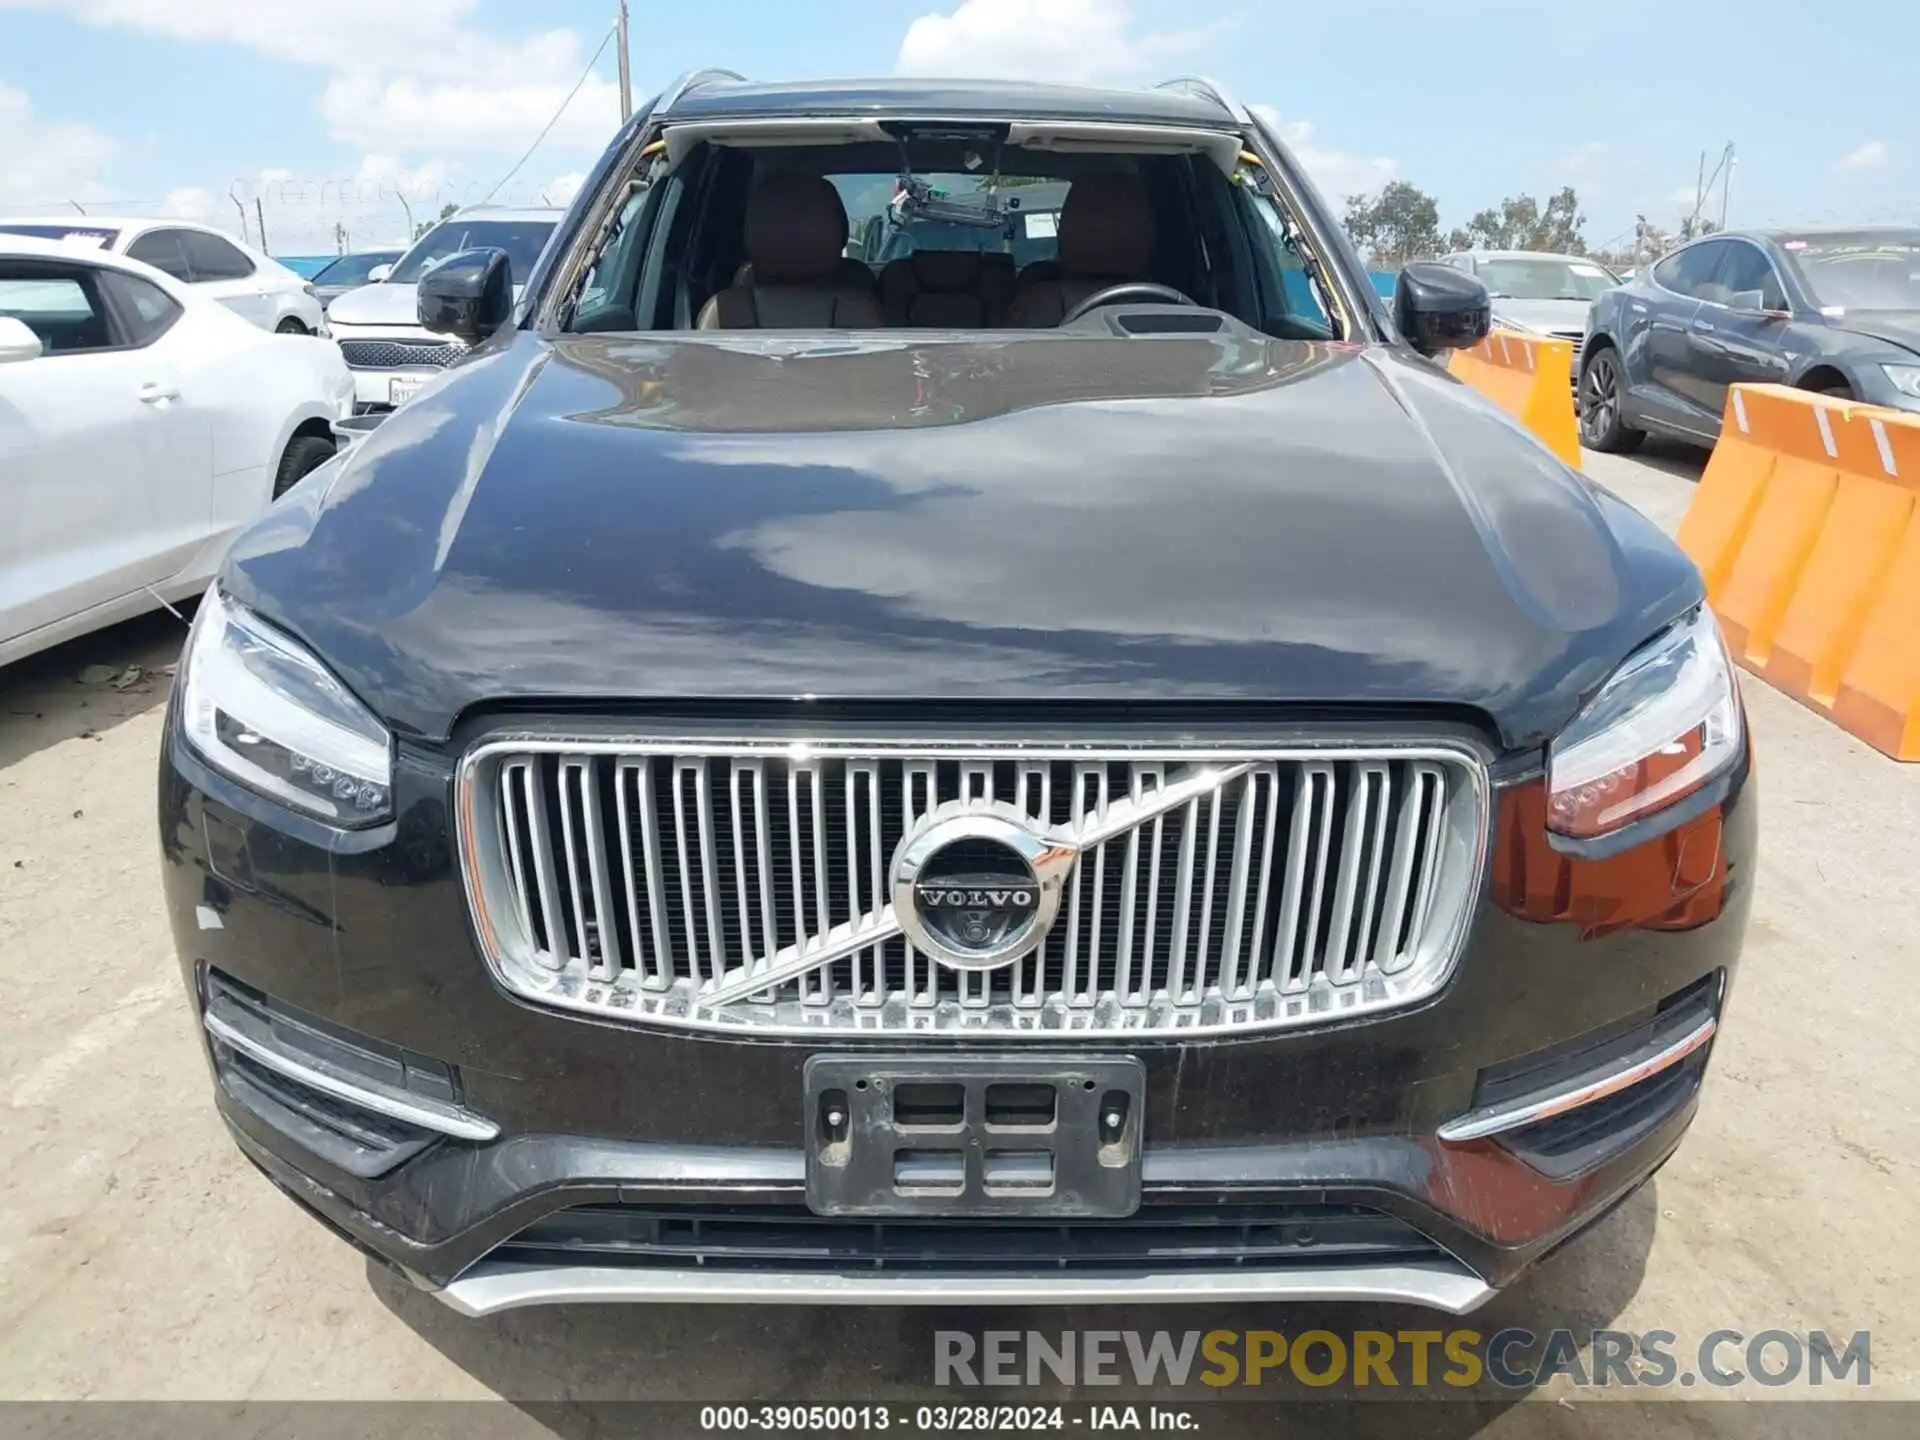 12 Photograph of a damaged car YV4A22PL1K1468484 VOLVO XC90 2019